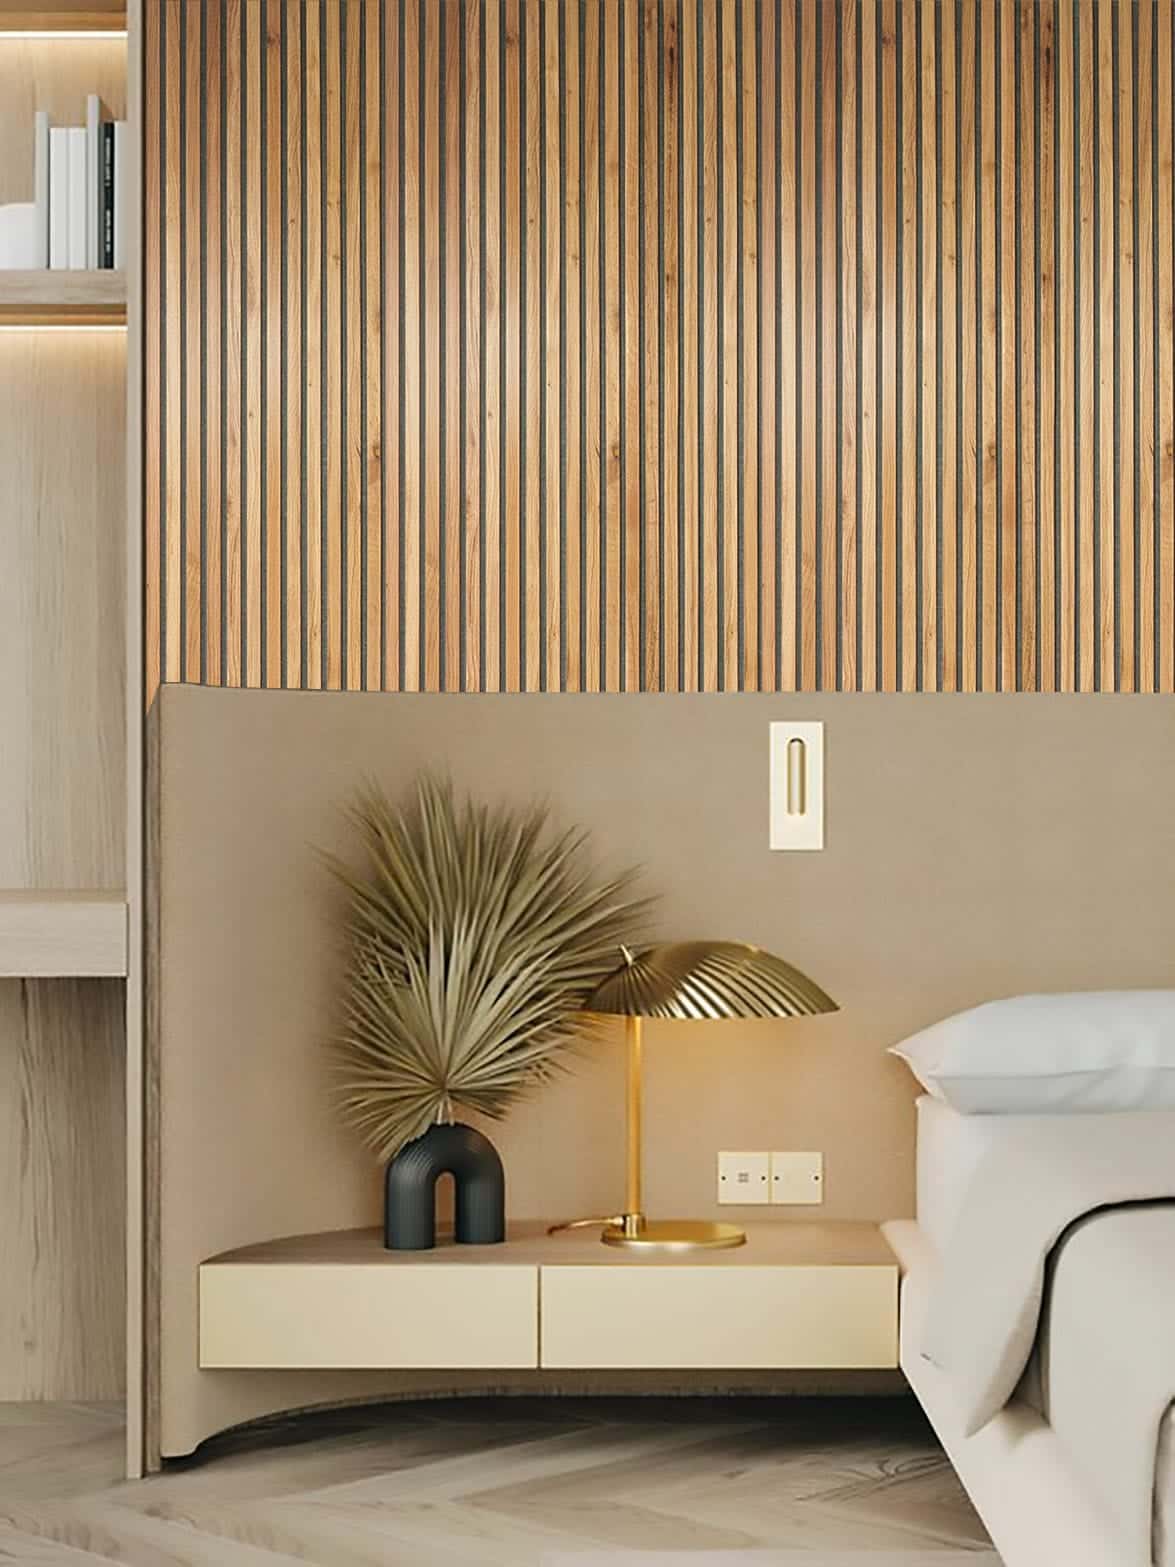 Wooden slat wall, wall panels & acoustic panels » WoodUpp  Feature wall  living room, Living room designs, Home design living room